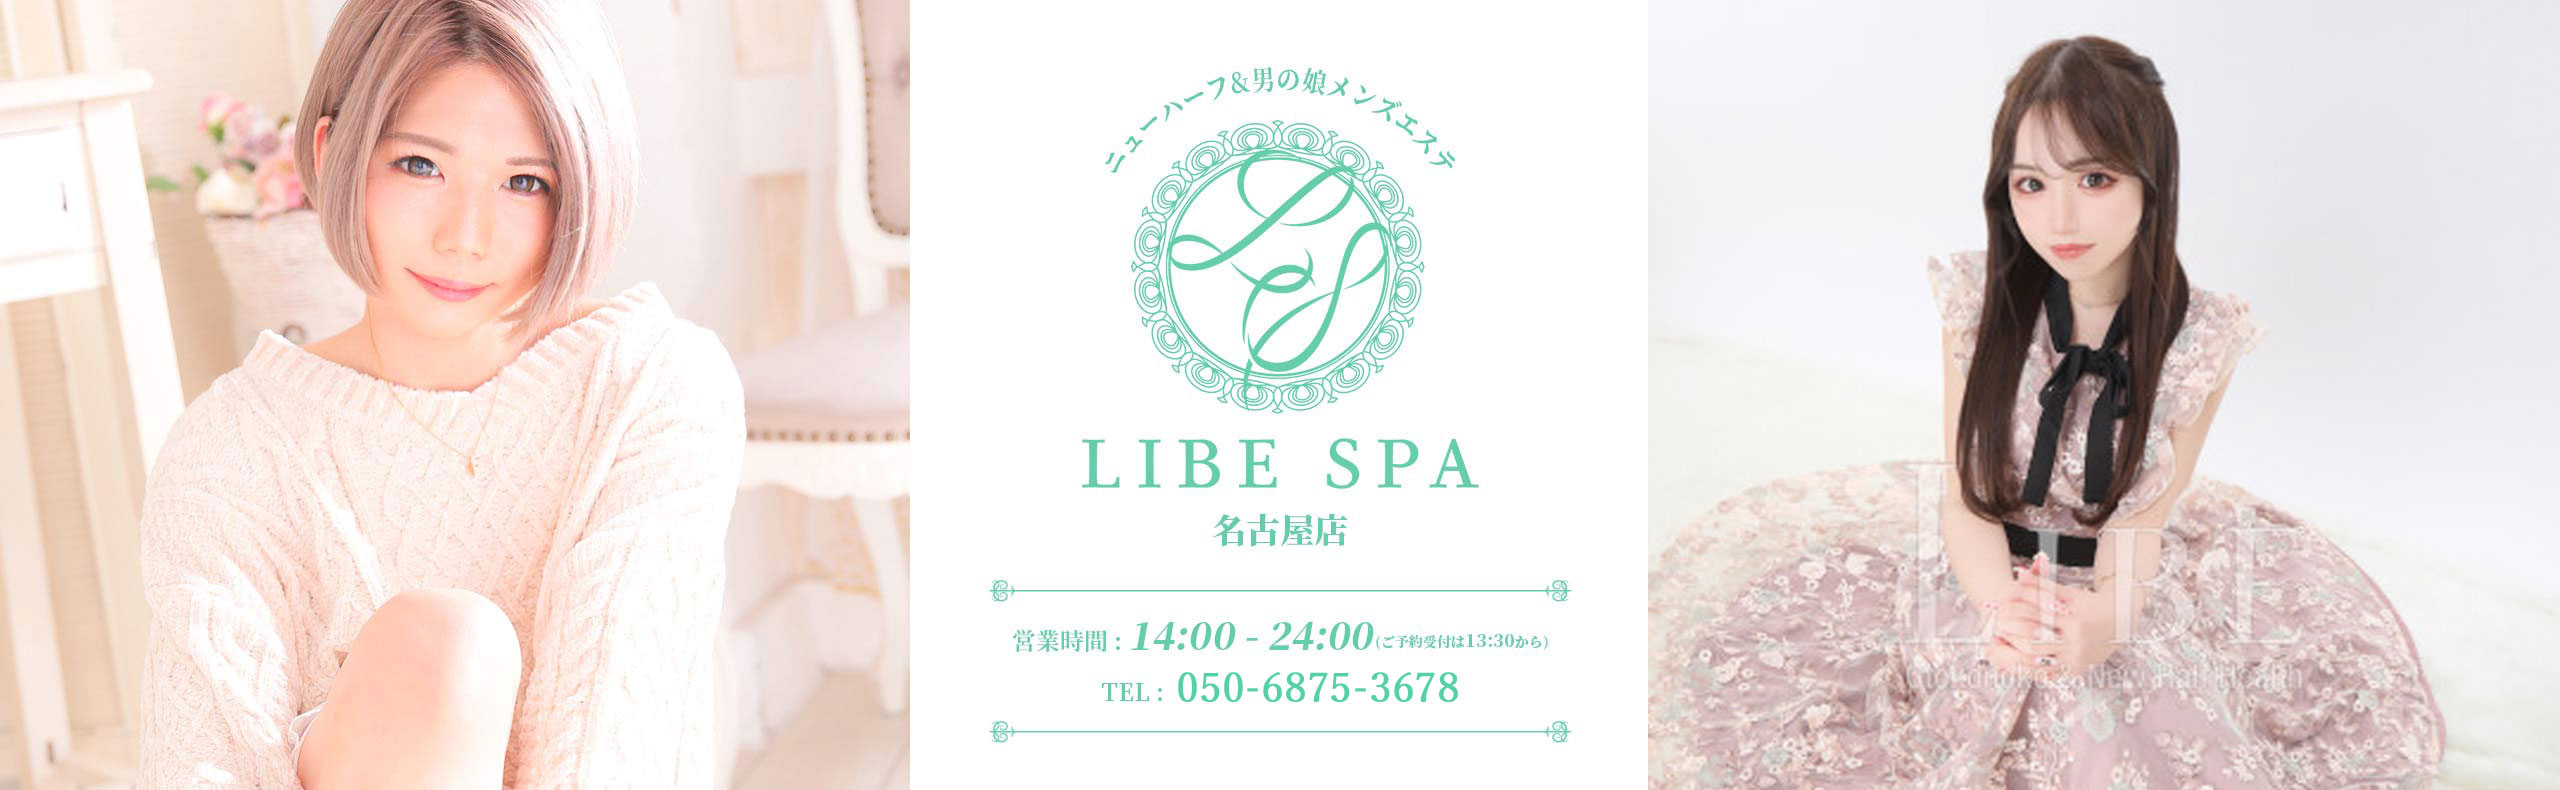 LIBE SPA 名古屋店メインビジュアル